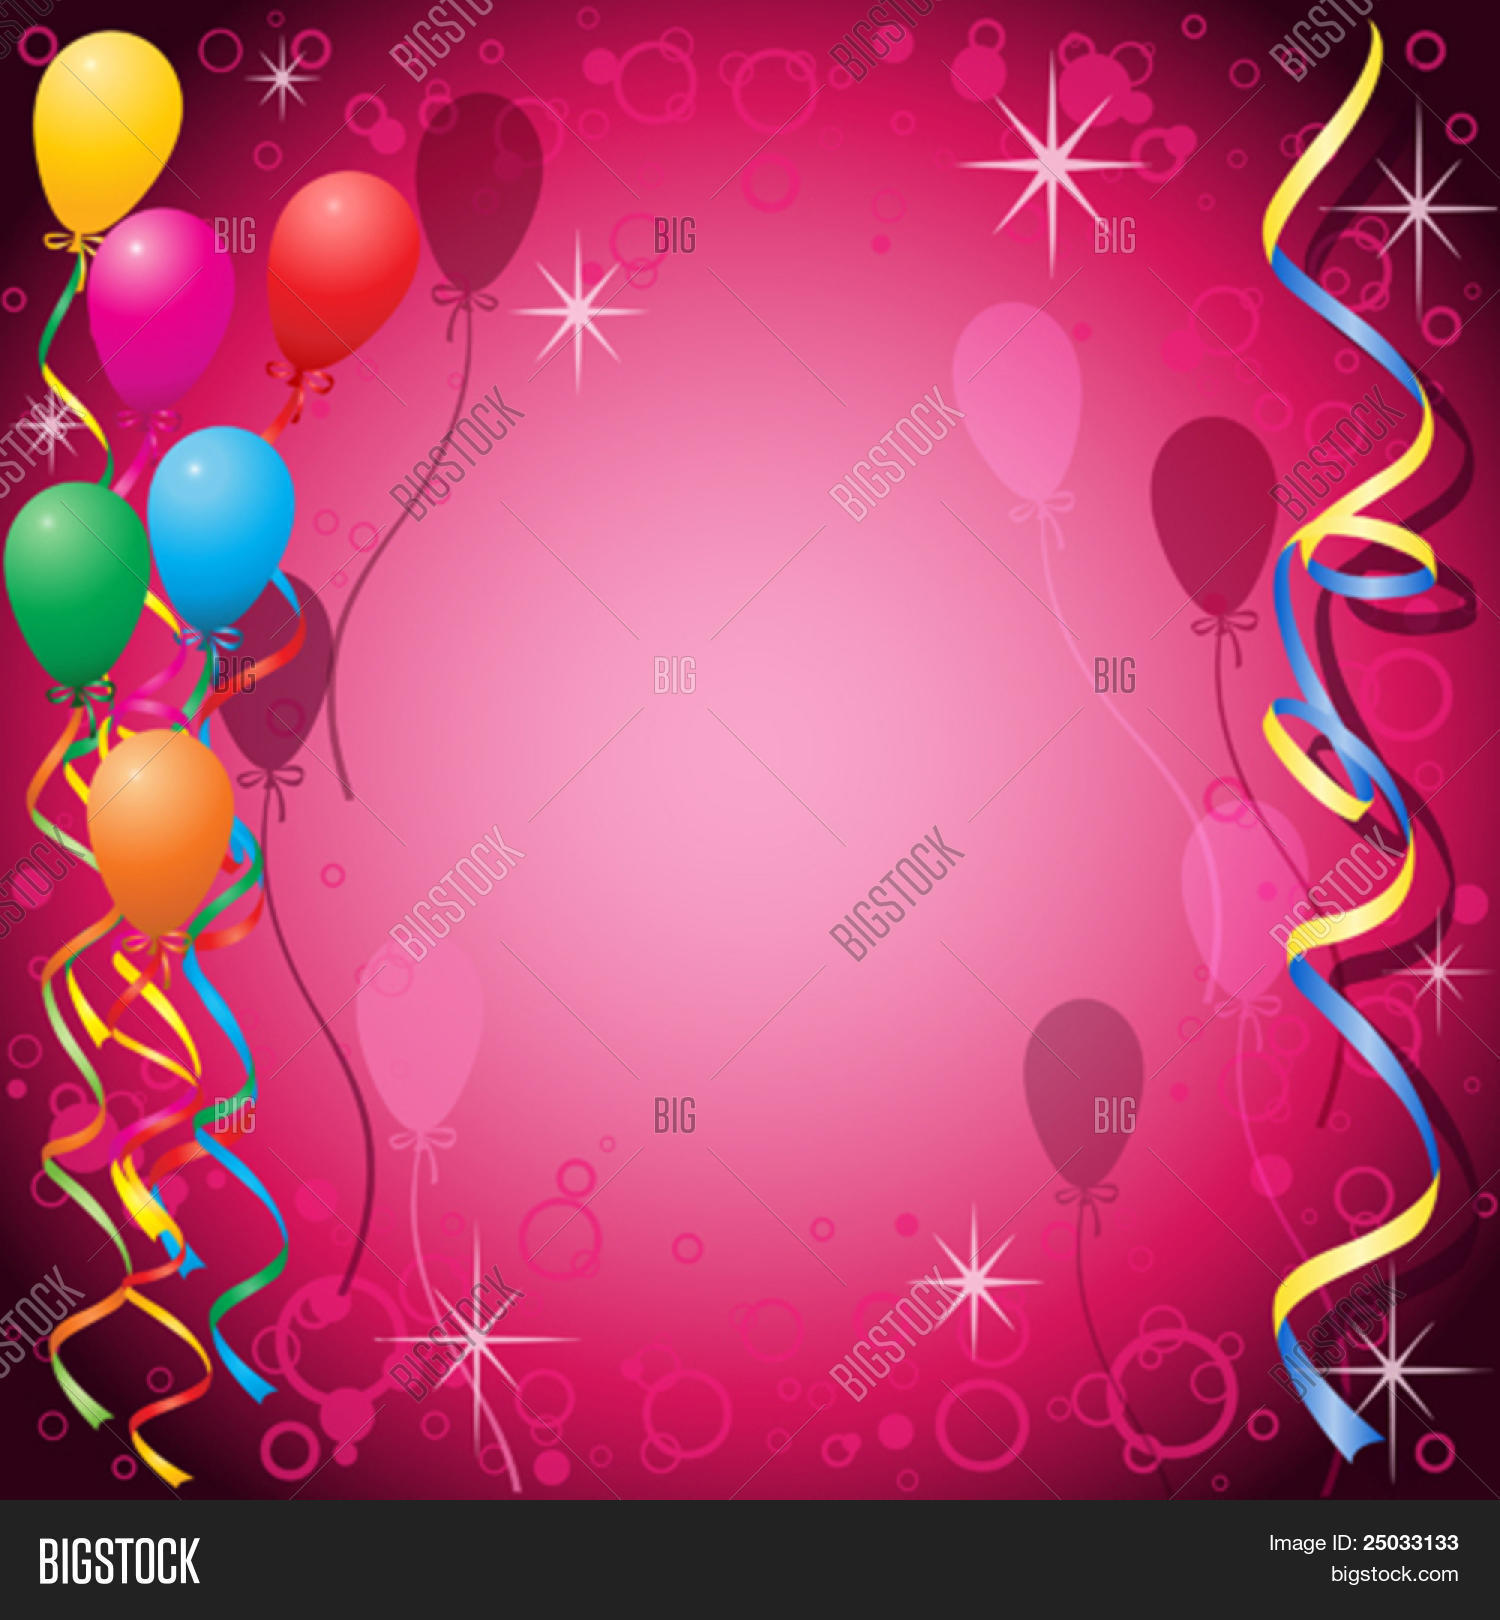 Party Background With Balloons And Streamers Stock Vector